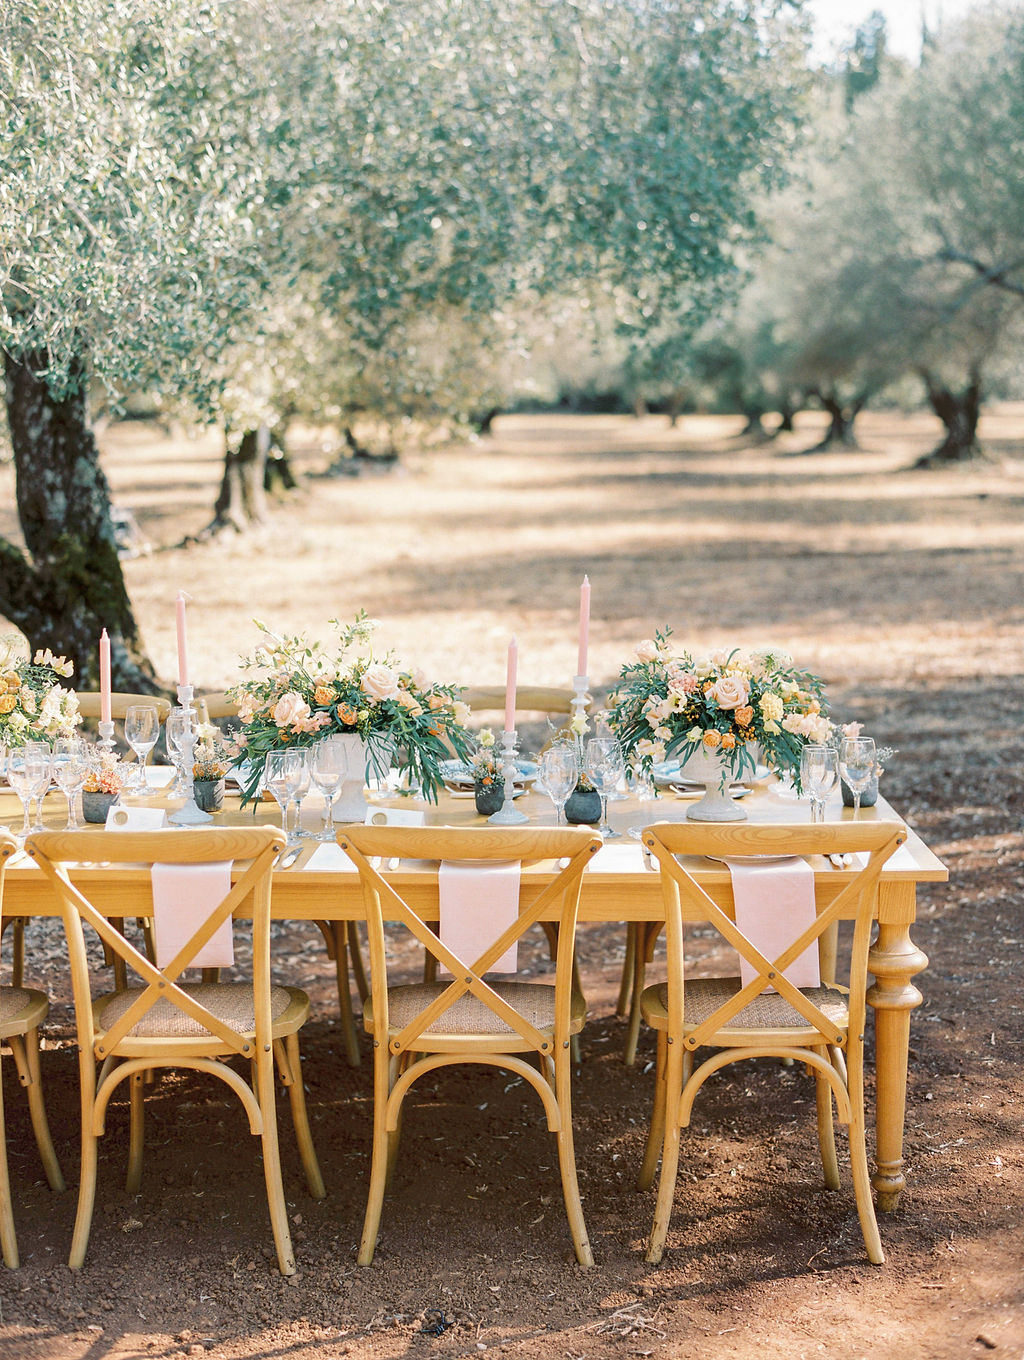 Olive Grove Wedding In Greece - Food Station